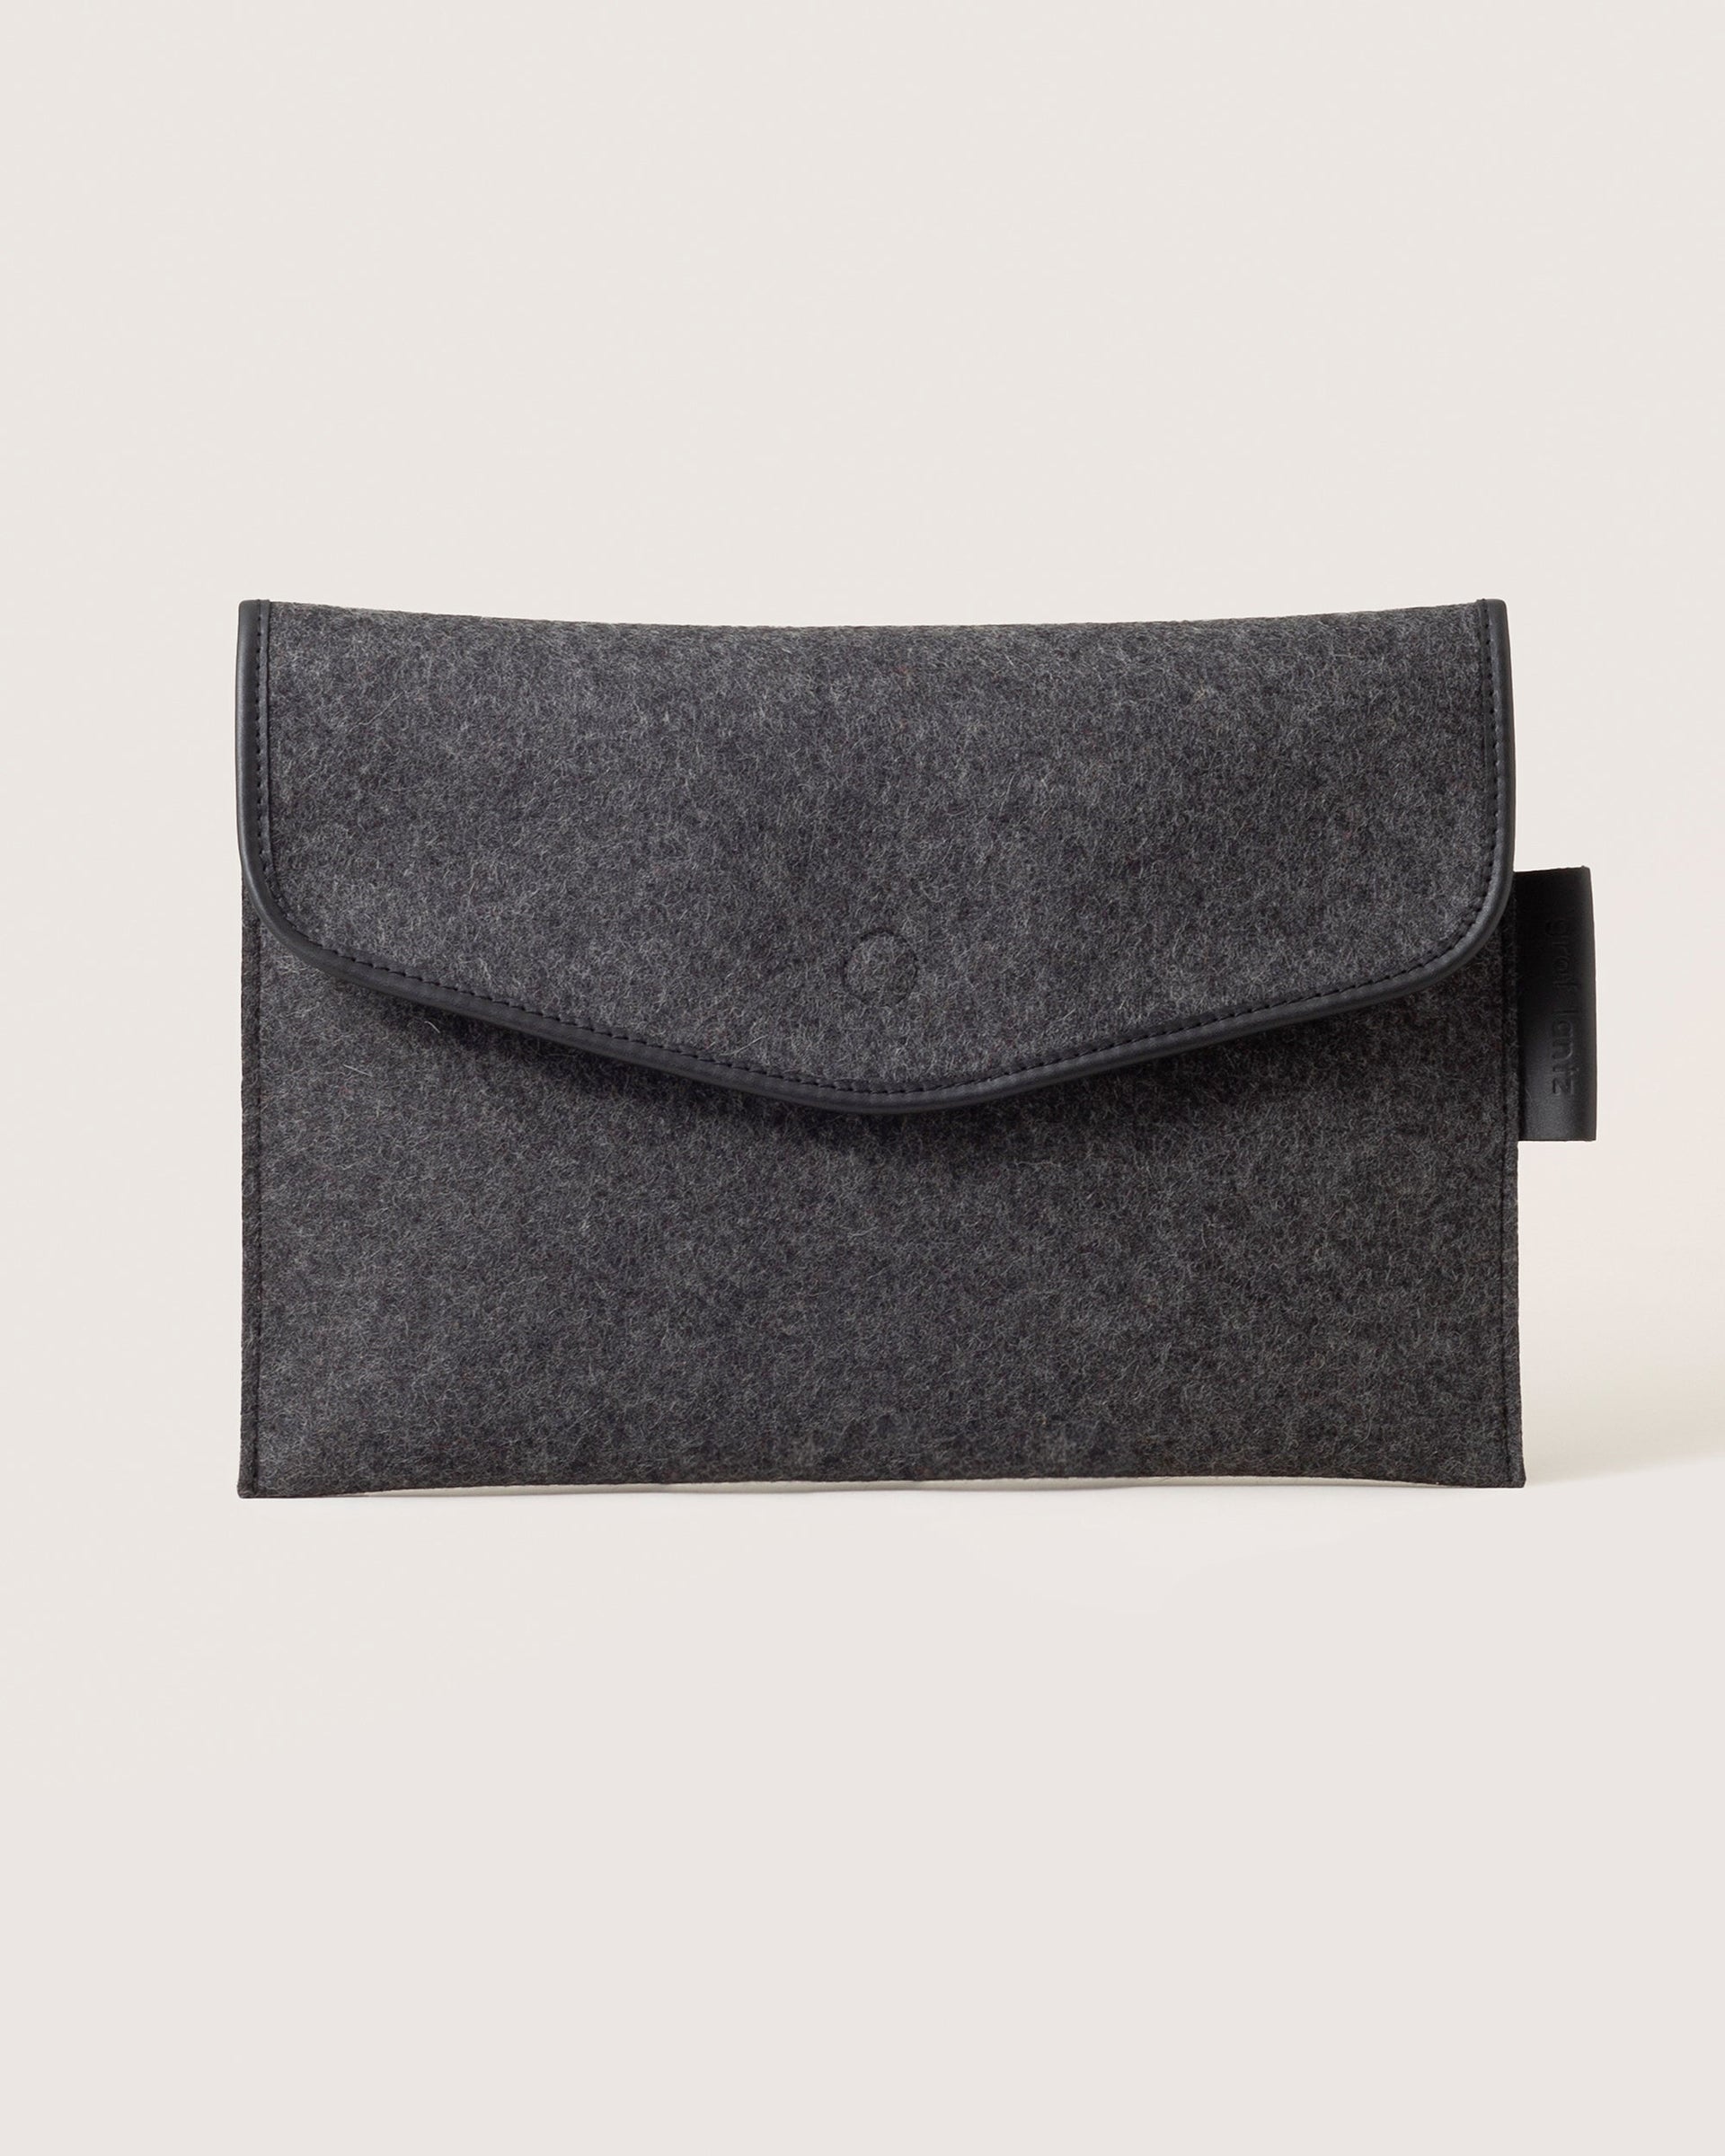 Envelope Merino Wool 16" Tech Sleeve in charcoal color with black leather application by Graf Lantz, front view